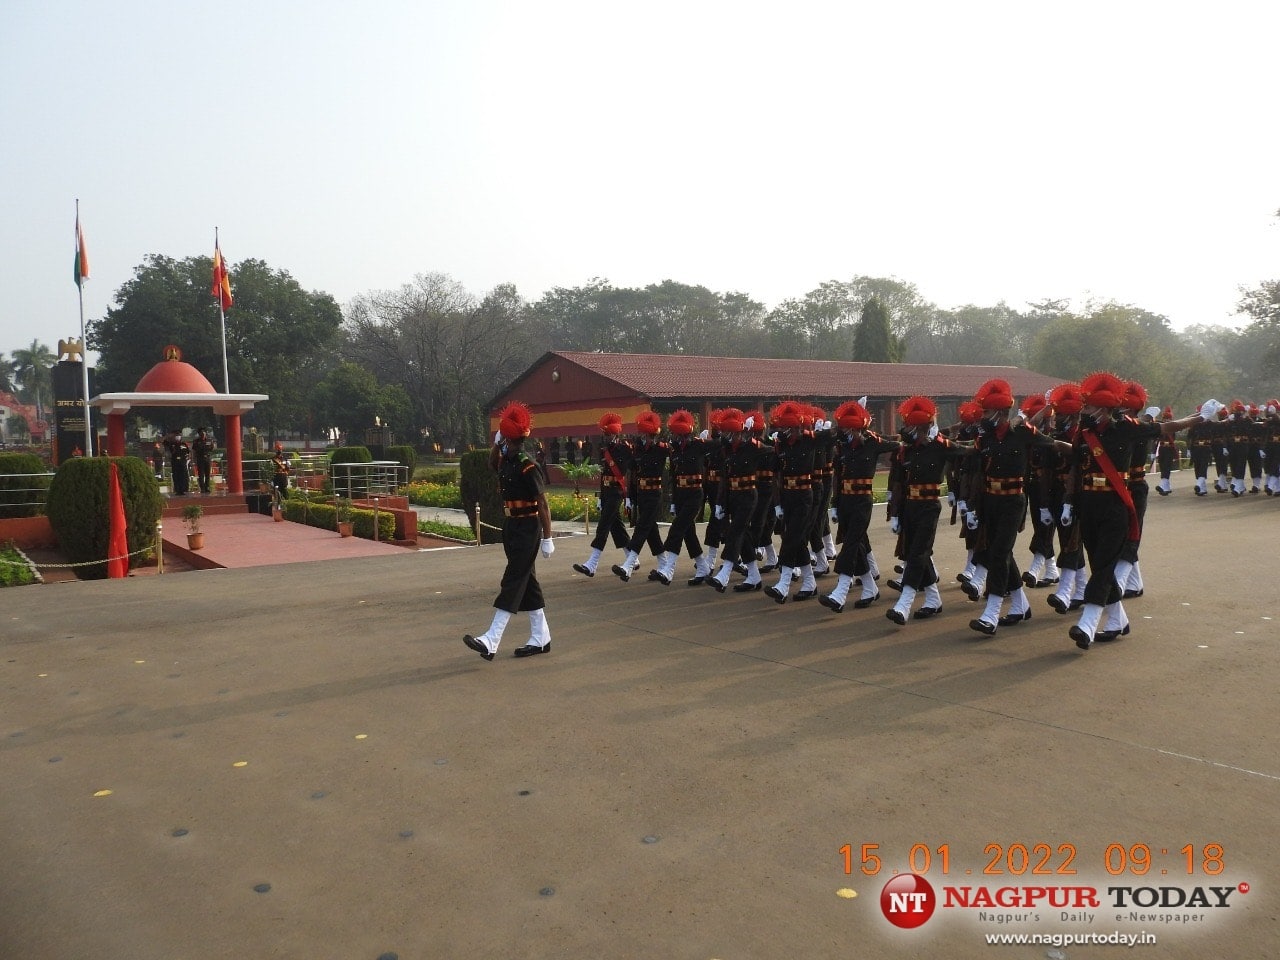 Guards Regimental Center Kamptee Nagpur Conducts Attestation Parade For 131 Course Of Recruits